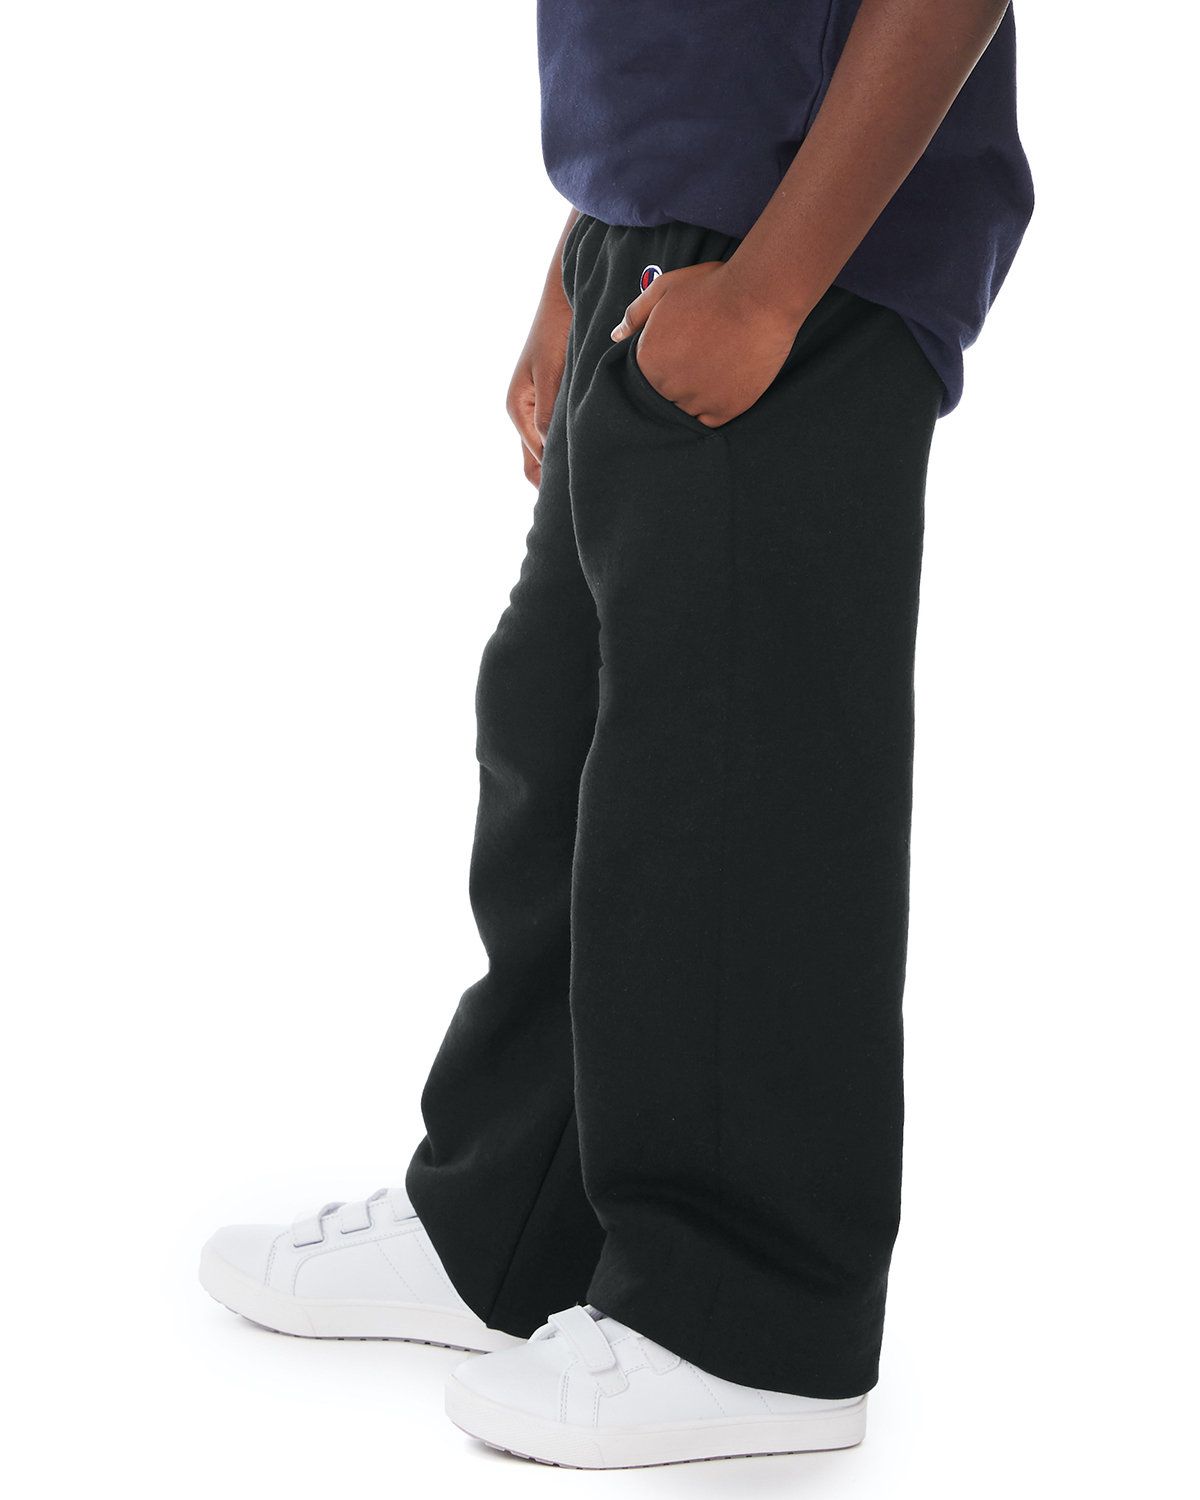 'Champion P890 Youth Double Dry Action Fleece Open Bottom Pant'